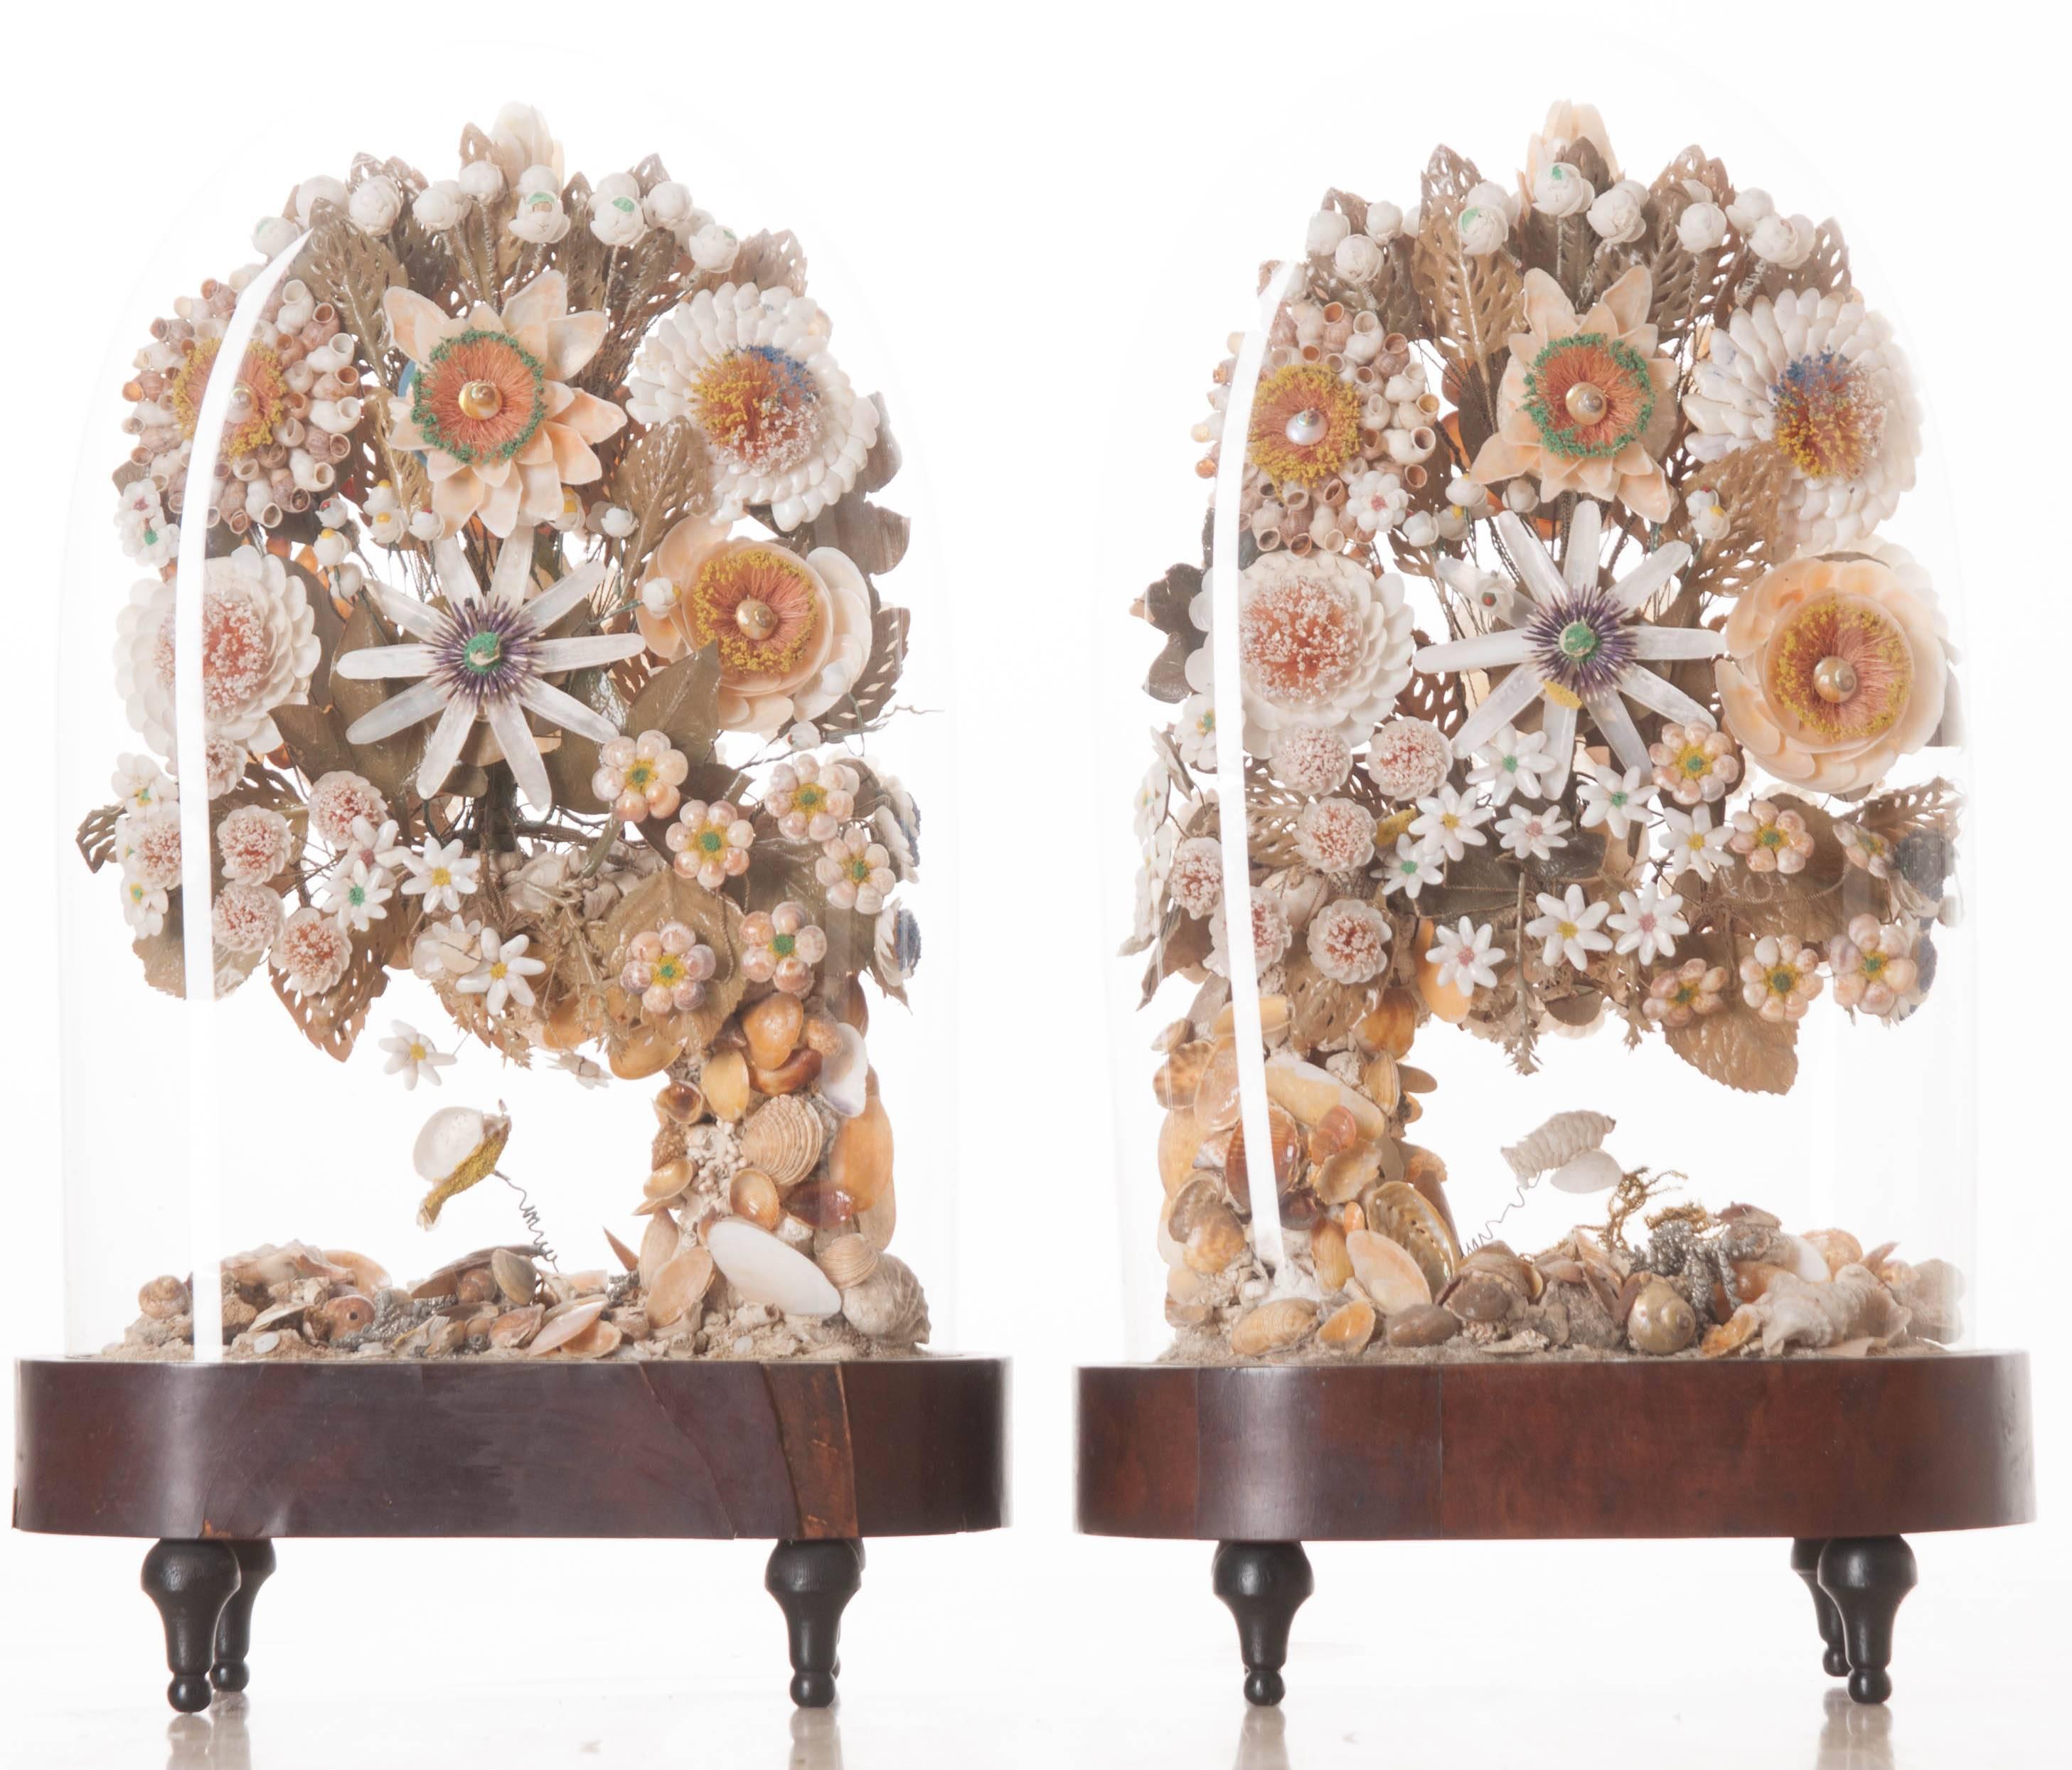 Also known as Sailor's Valentines, these works of art are meticulously fashioned from hundreds of sea shells that are made into intricate floral arrangements that sailors would bring back to loved ones after long voyages at sea. This stunning pair